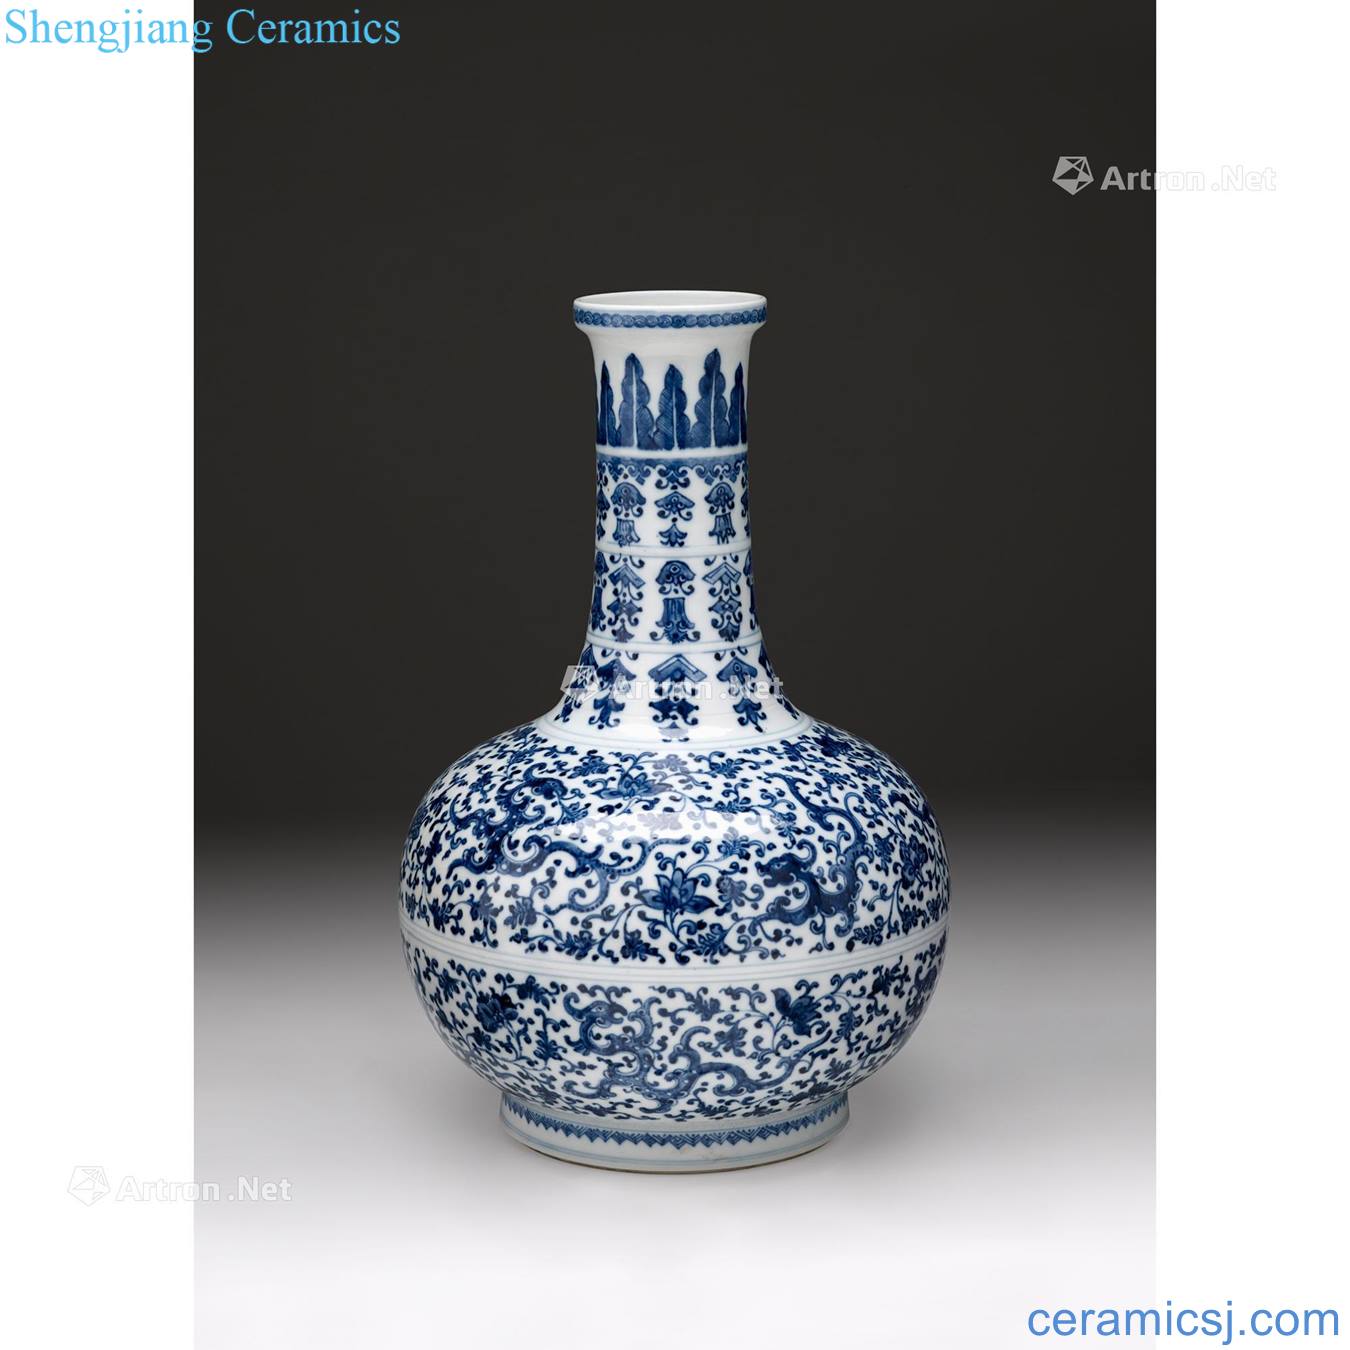 In the 18th century qing Blue and white tie up flower dragon grain design